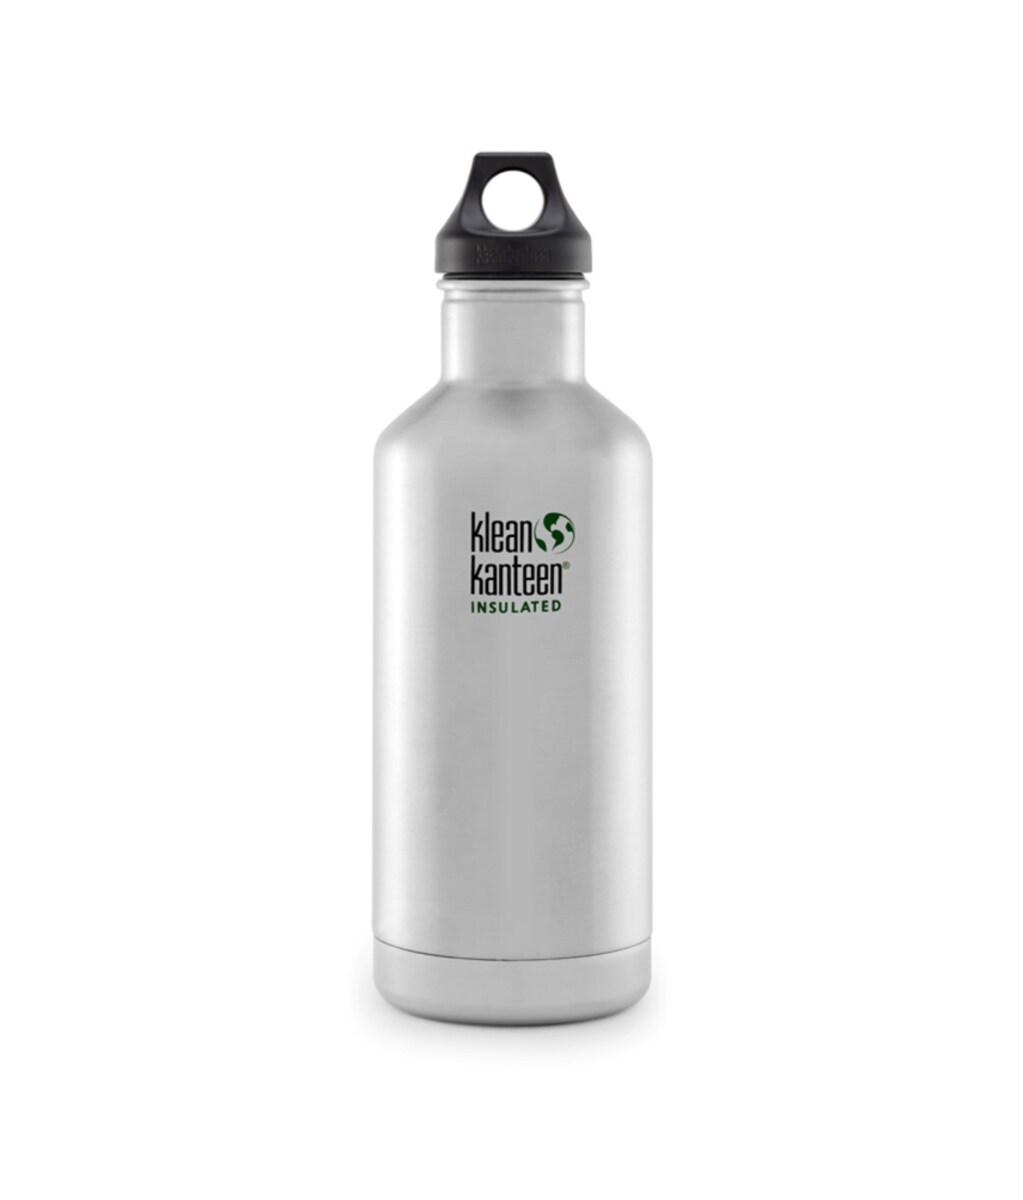 Klean Kanteen Classic Insulated 946ml Loop Cap Bottle Brushed Stainless